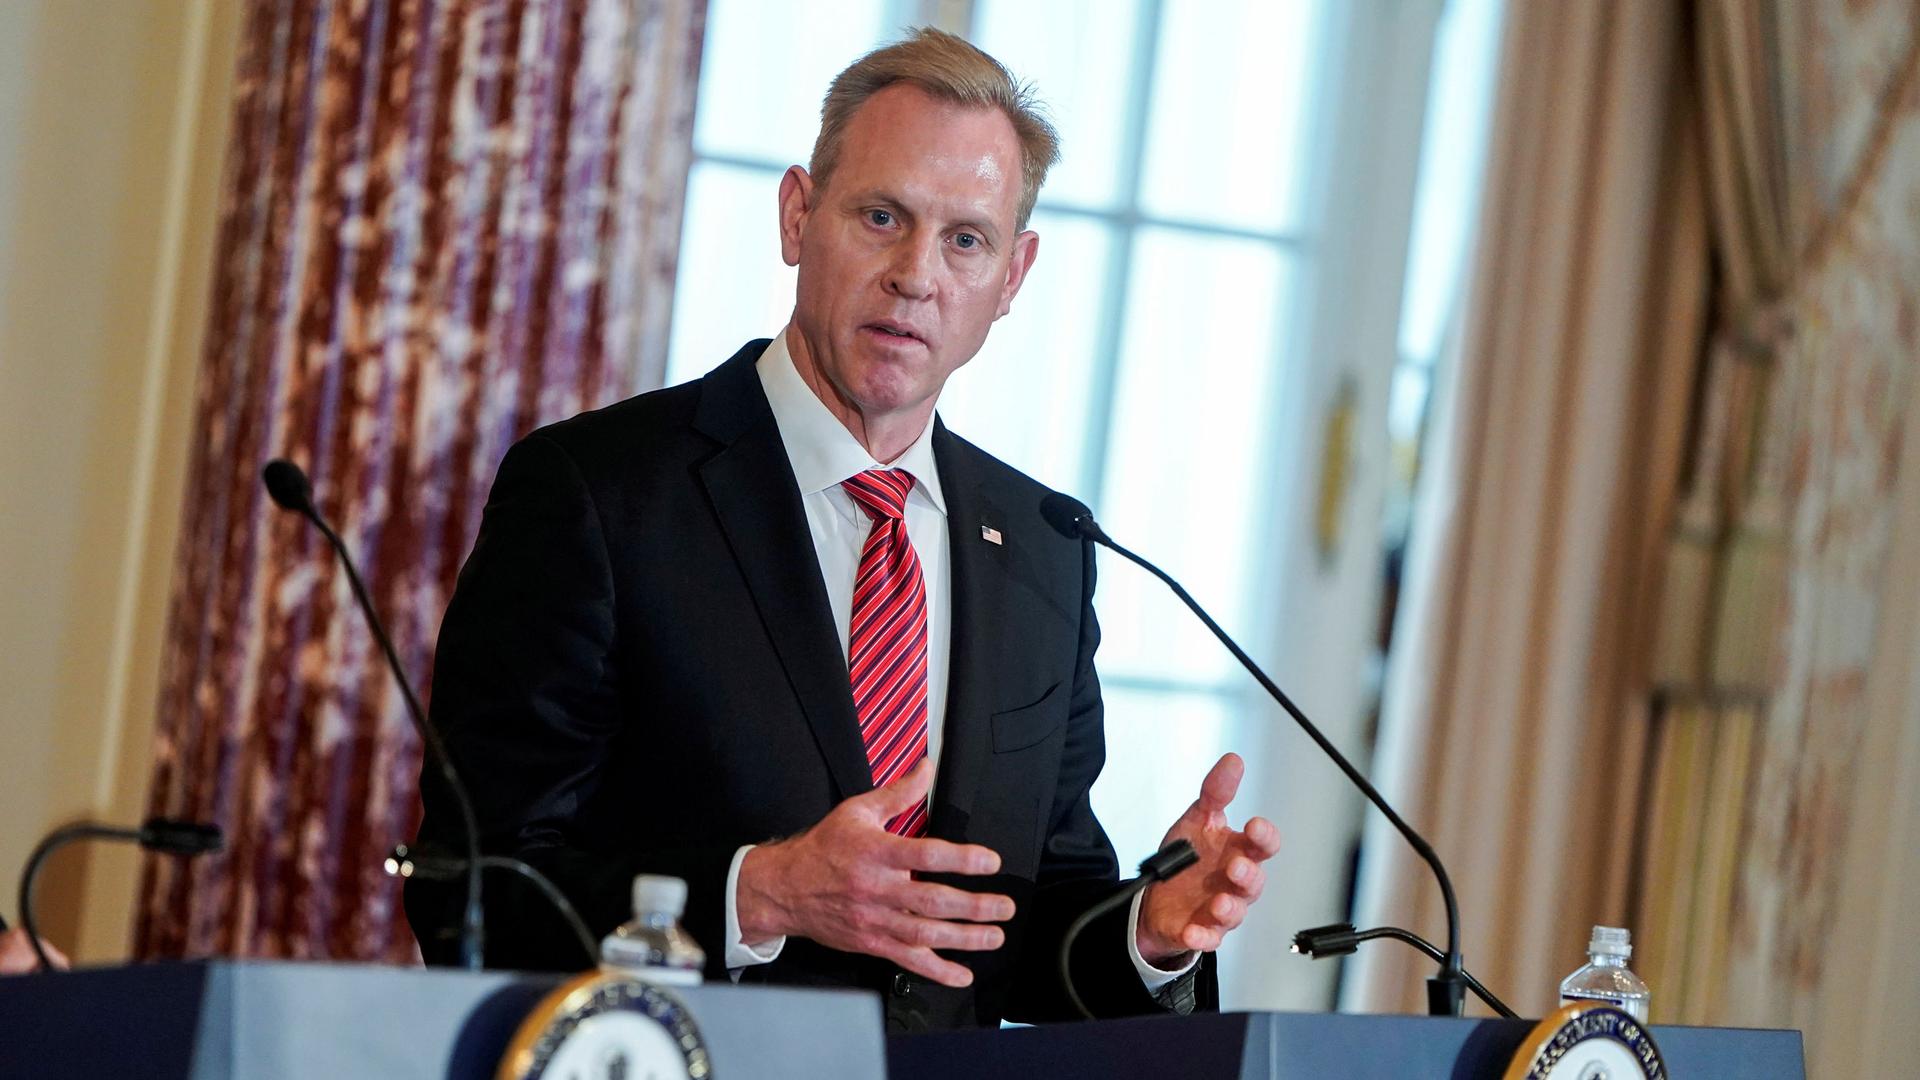 Acting US Secretary of Defense Patrick Shanahan is shown standing behind a podium with a microphone, looking to his right.